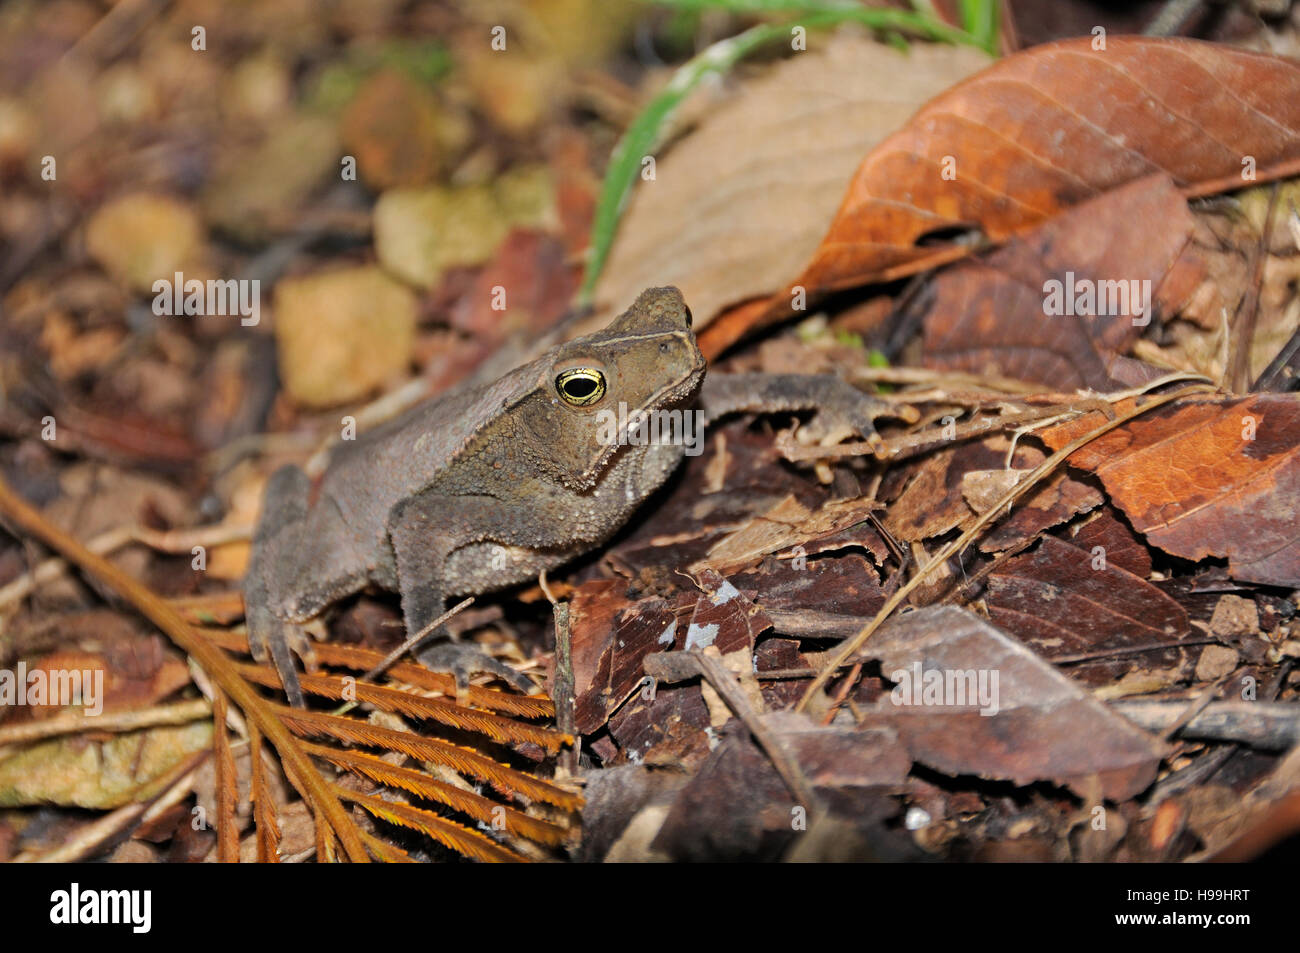 South American common toad, mitred toad, Rainforest, Gamboa, Panama Stock Photo